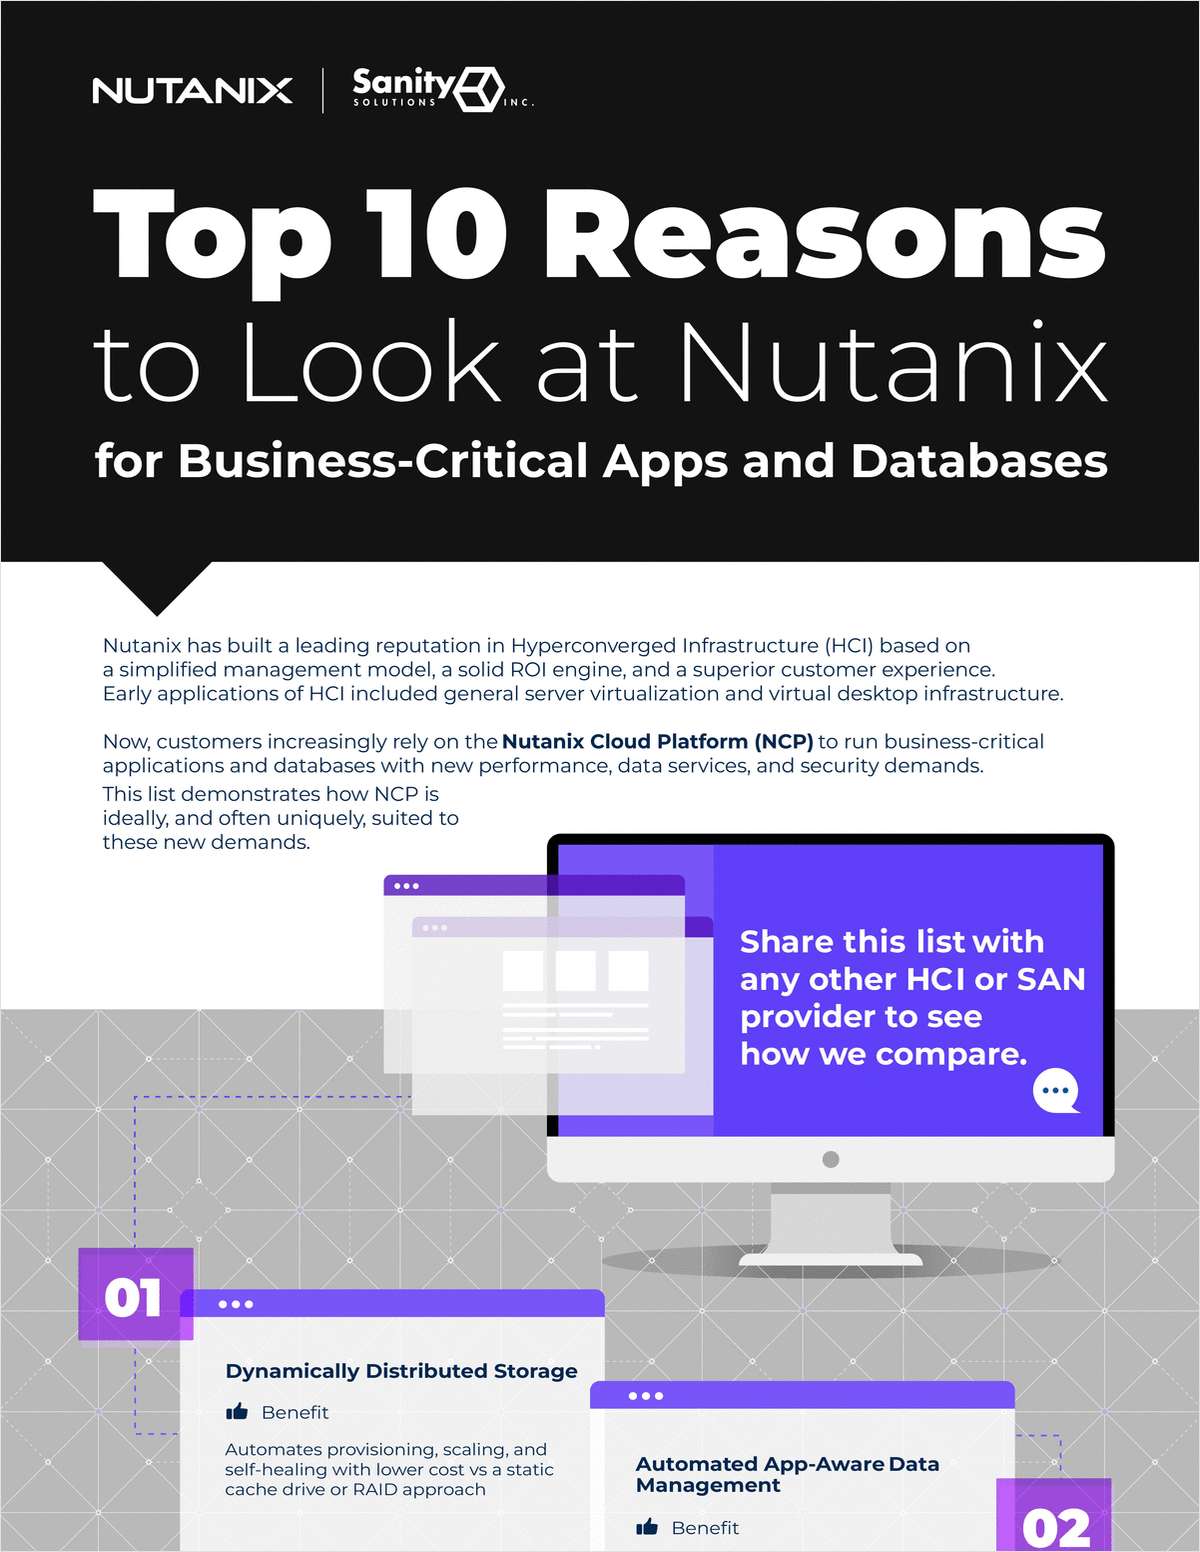 Top 10 Reasons to Look at Nutanix for Business-Critical Apps and Databases